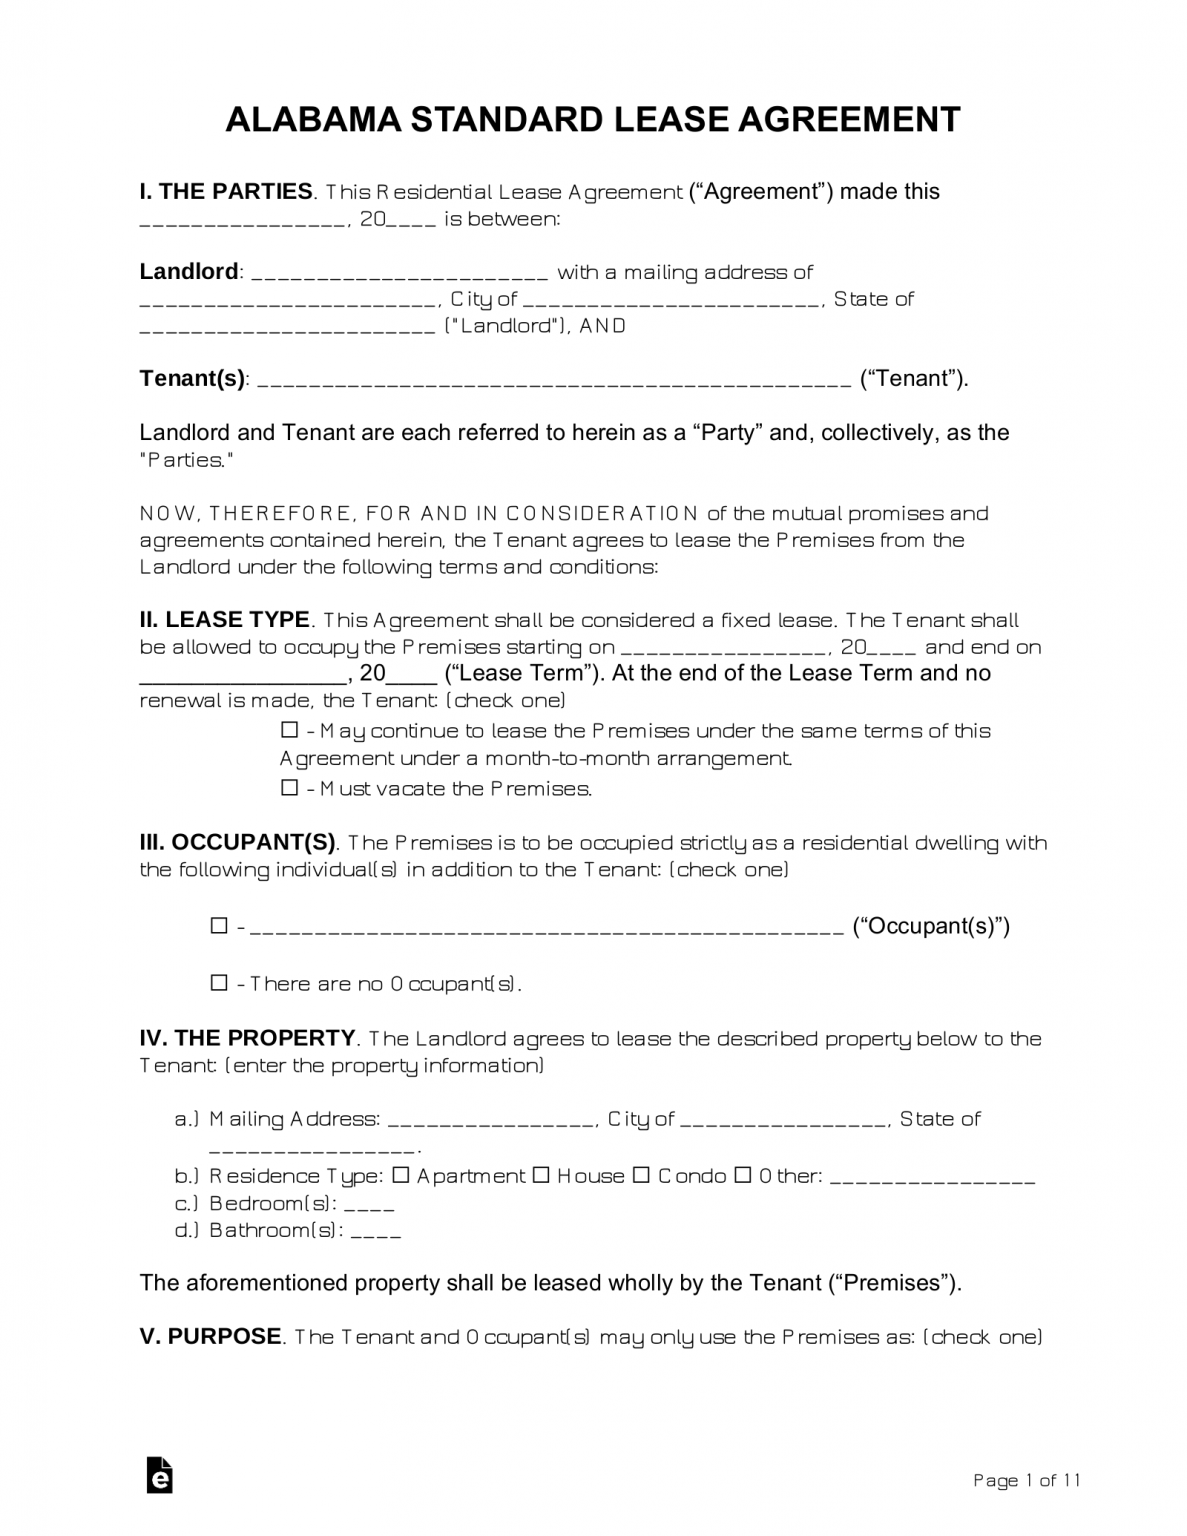 free-alabama-standard-residential-lease-agreement-template-word-pdf